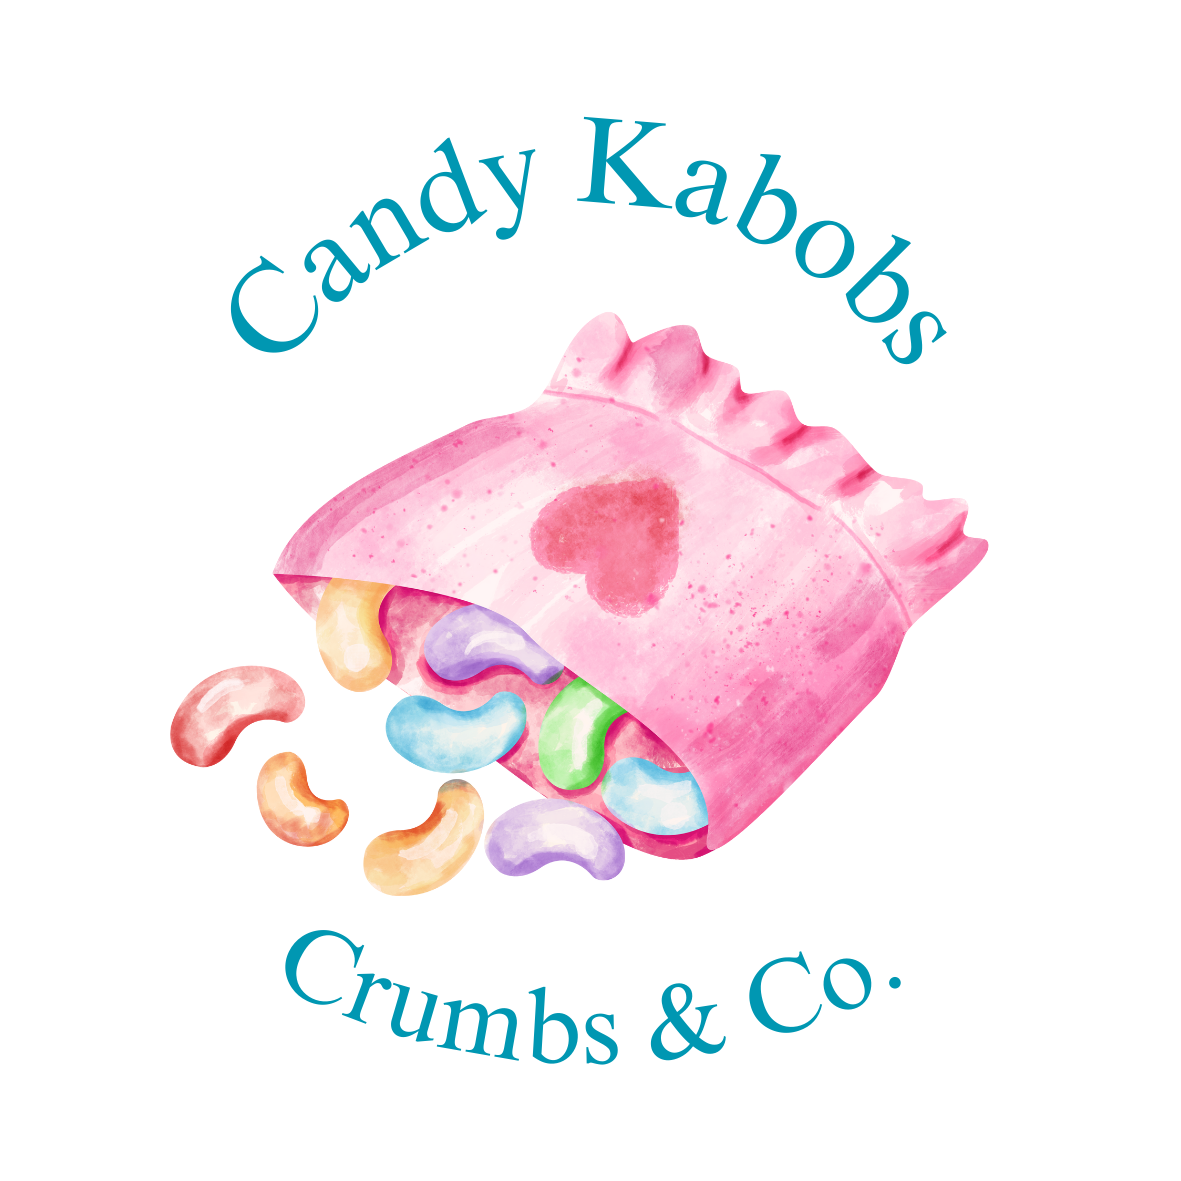 Candy Kabobs by Crumbs and Co.